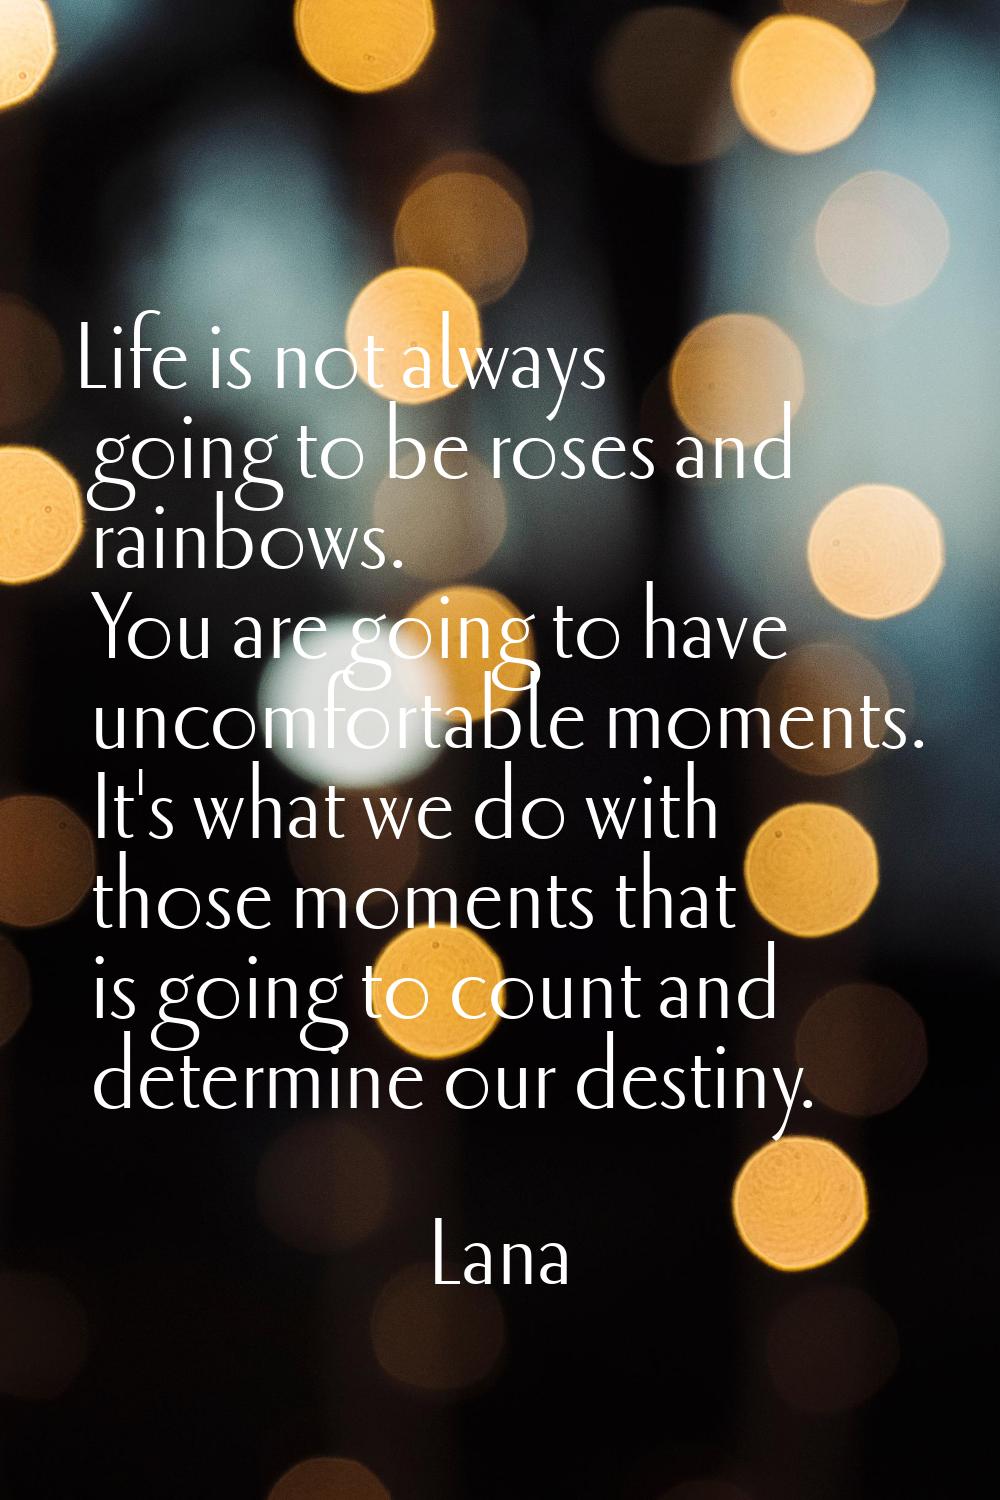 Life is not always going to be roses and rainbows. You are going to have uncomfortable moments. It'